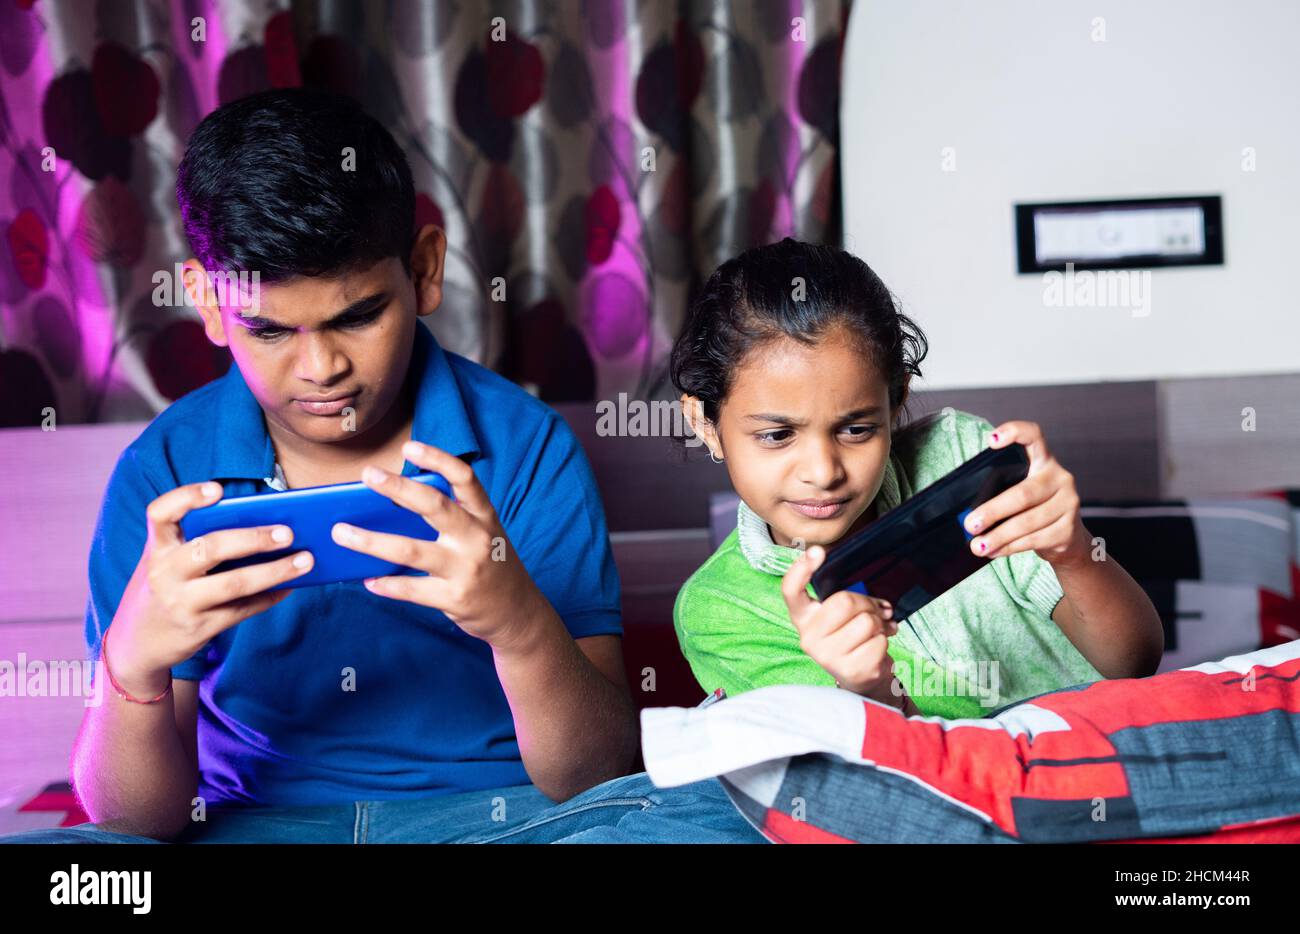 Siblings busy playing video game on mobile phone during night sleep - concept of kids gaming addiction, childhood lifestyles and technology. Stock Photo